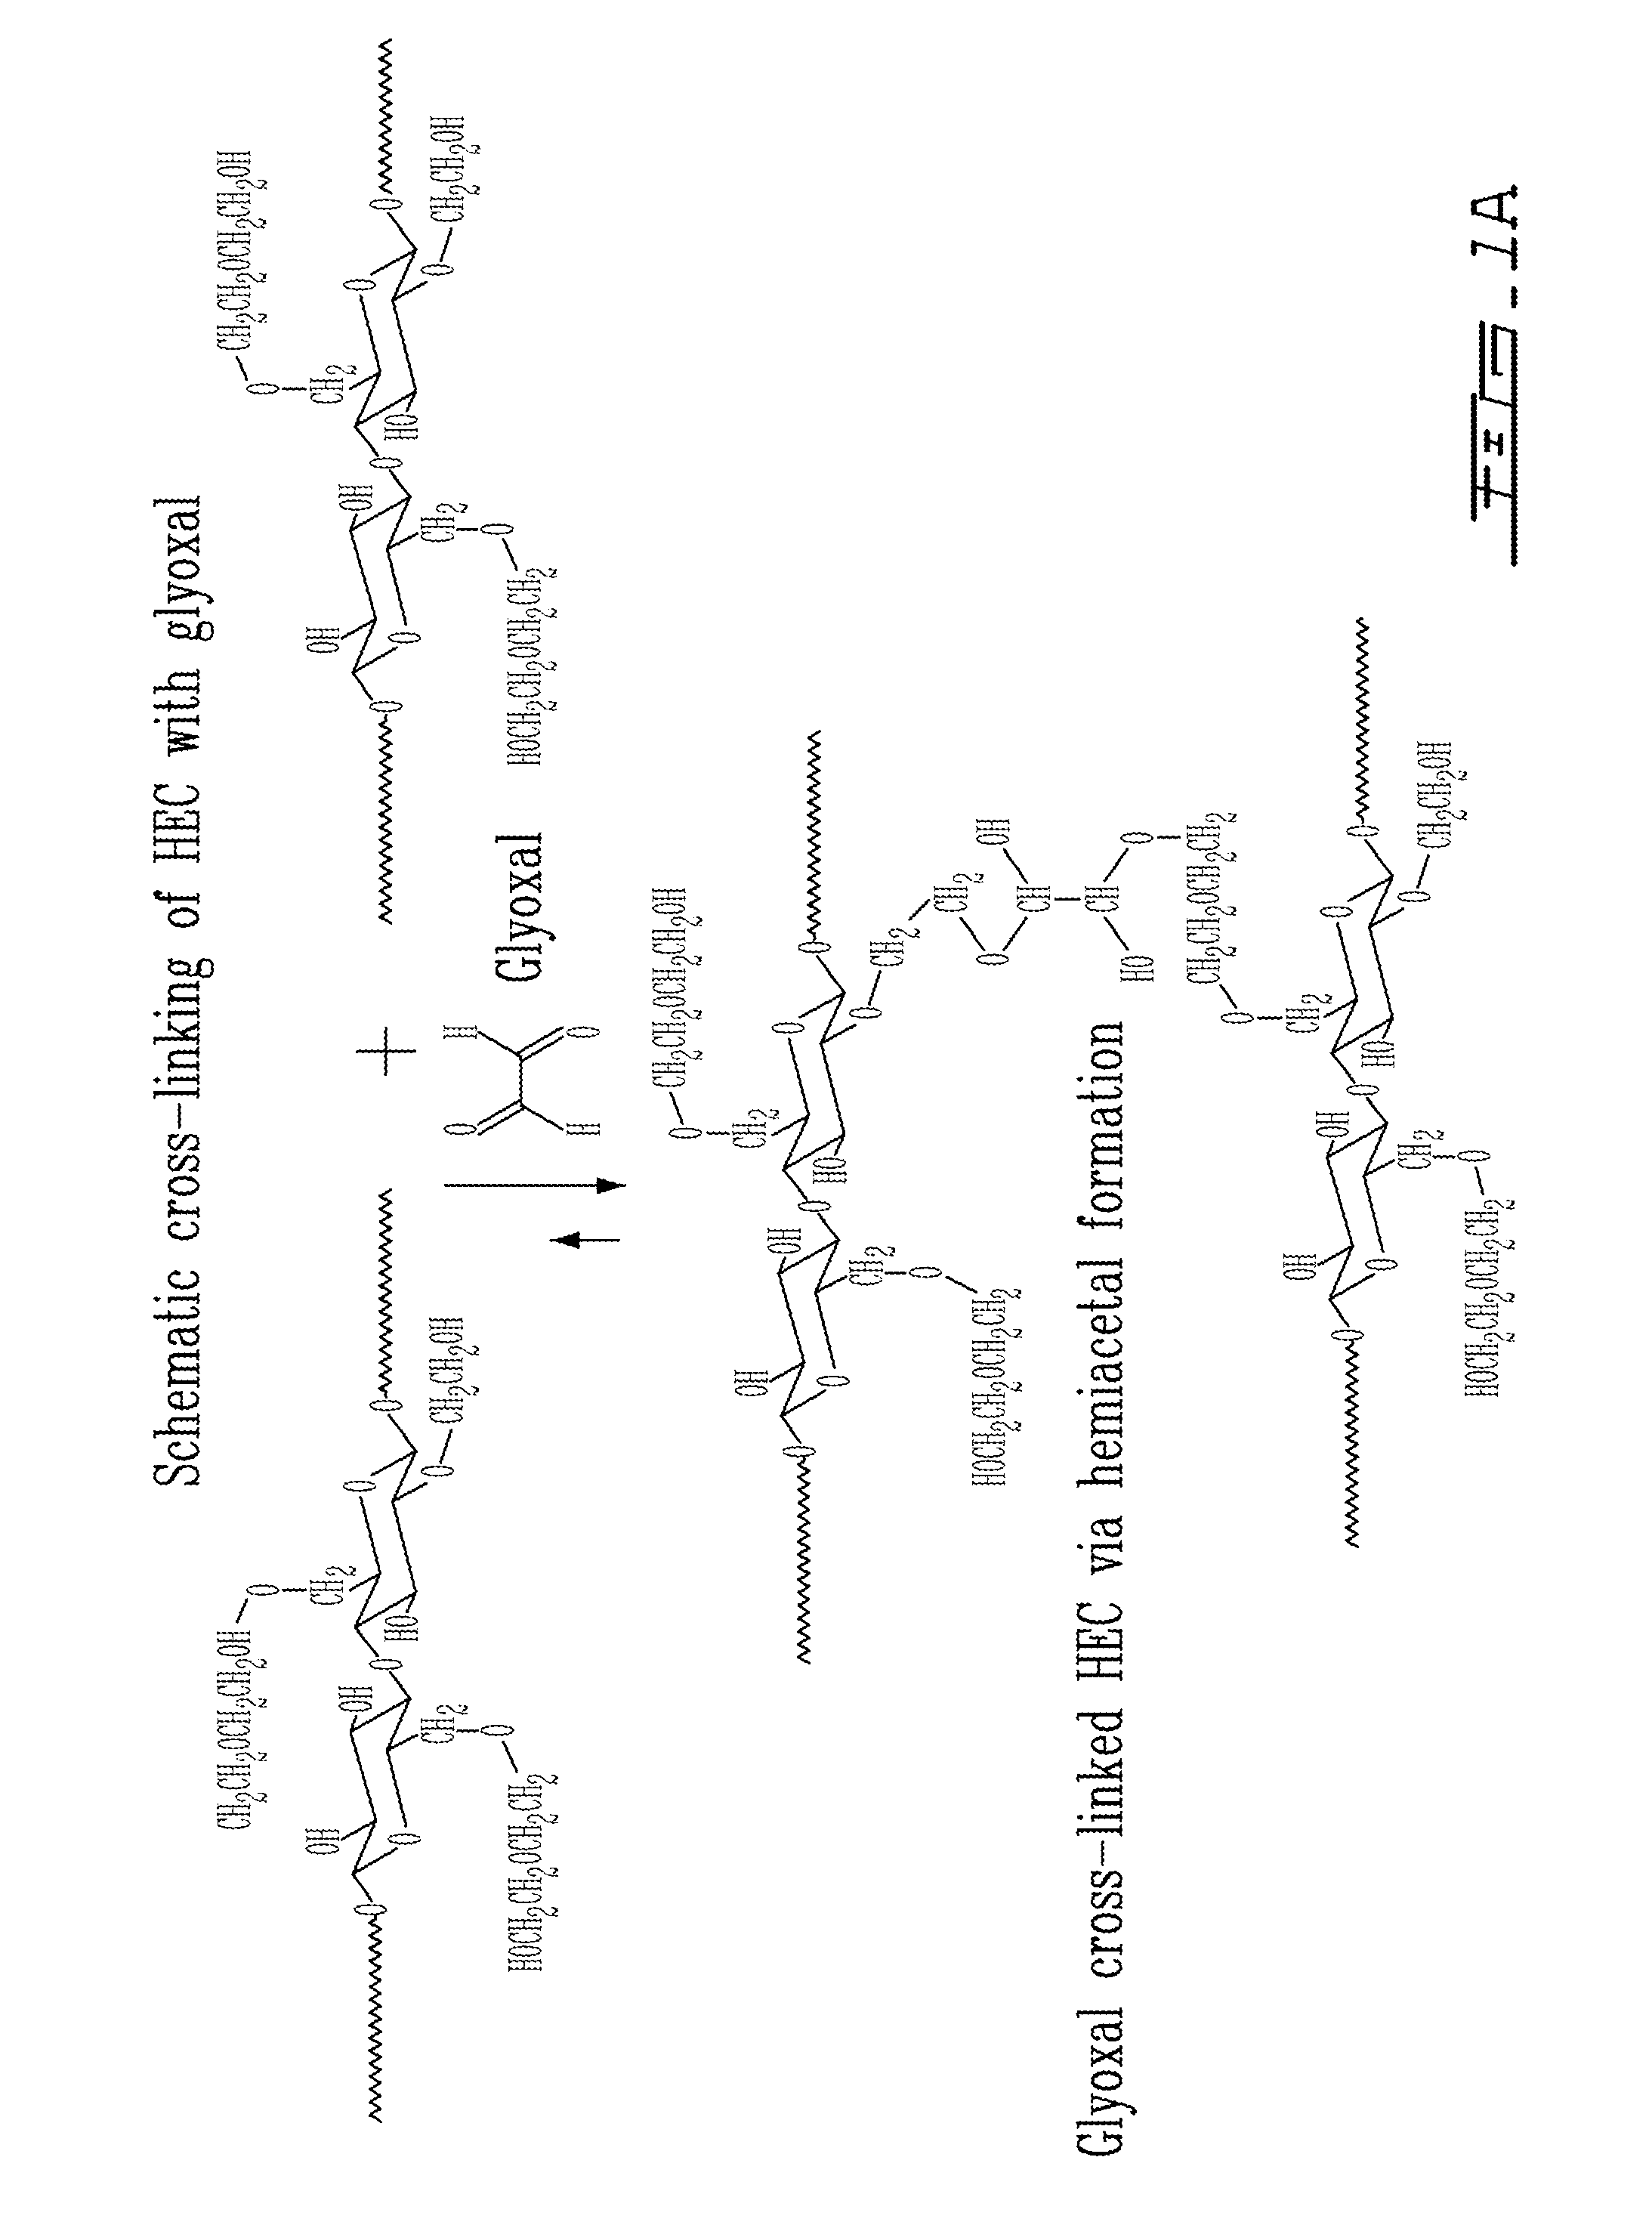 Composition for cytocompatible, injectable, self-gelling polysaccharide solutions for encapsulating and delivering live cells or biologically active factors